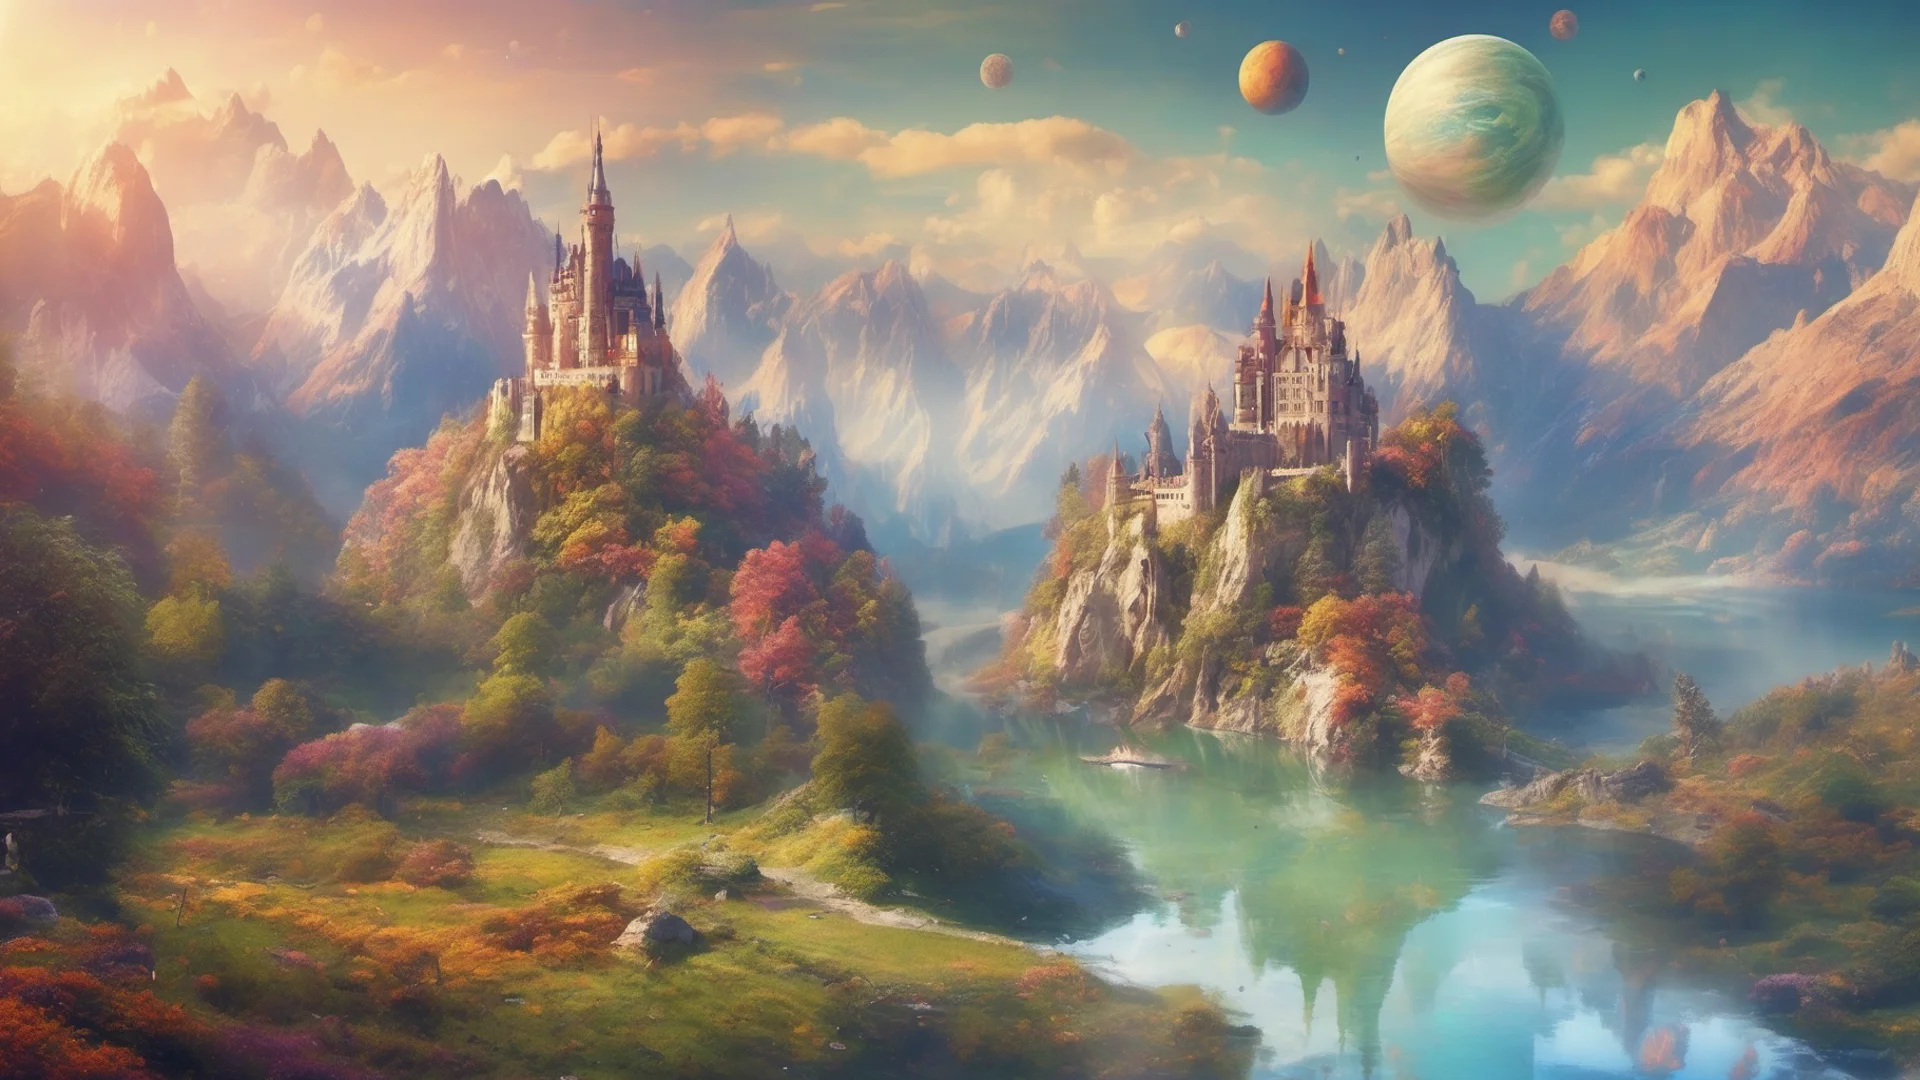 beautiful environment castle on mountains with lakes colorful planets amazing awesome portrait 2 wide